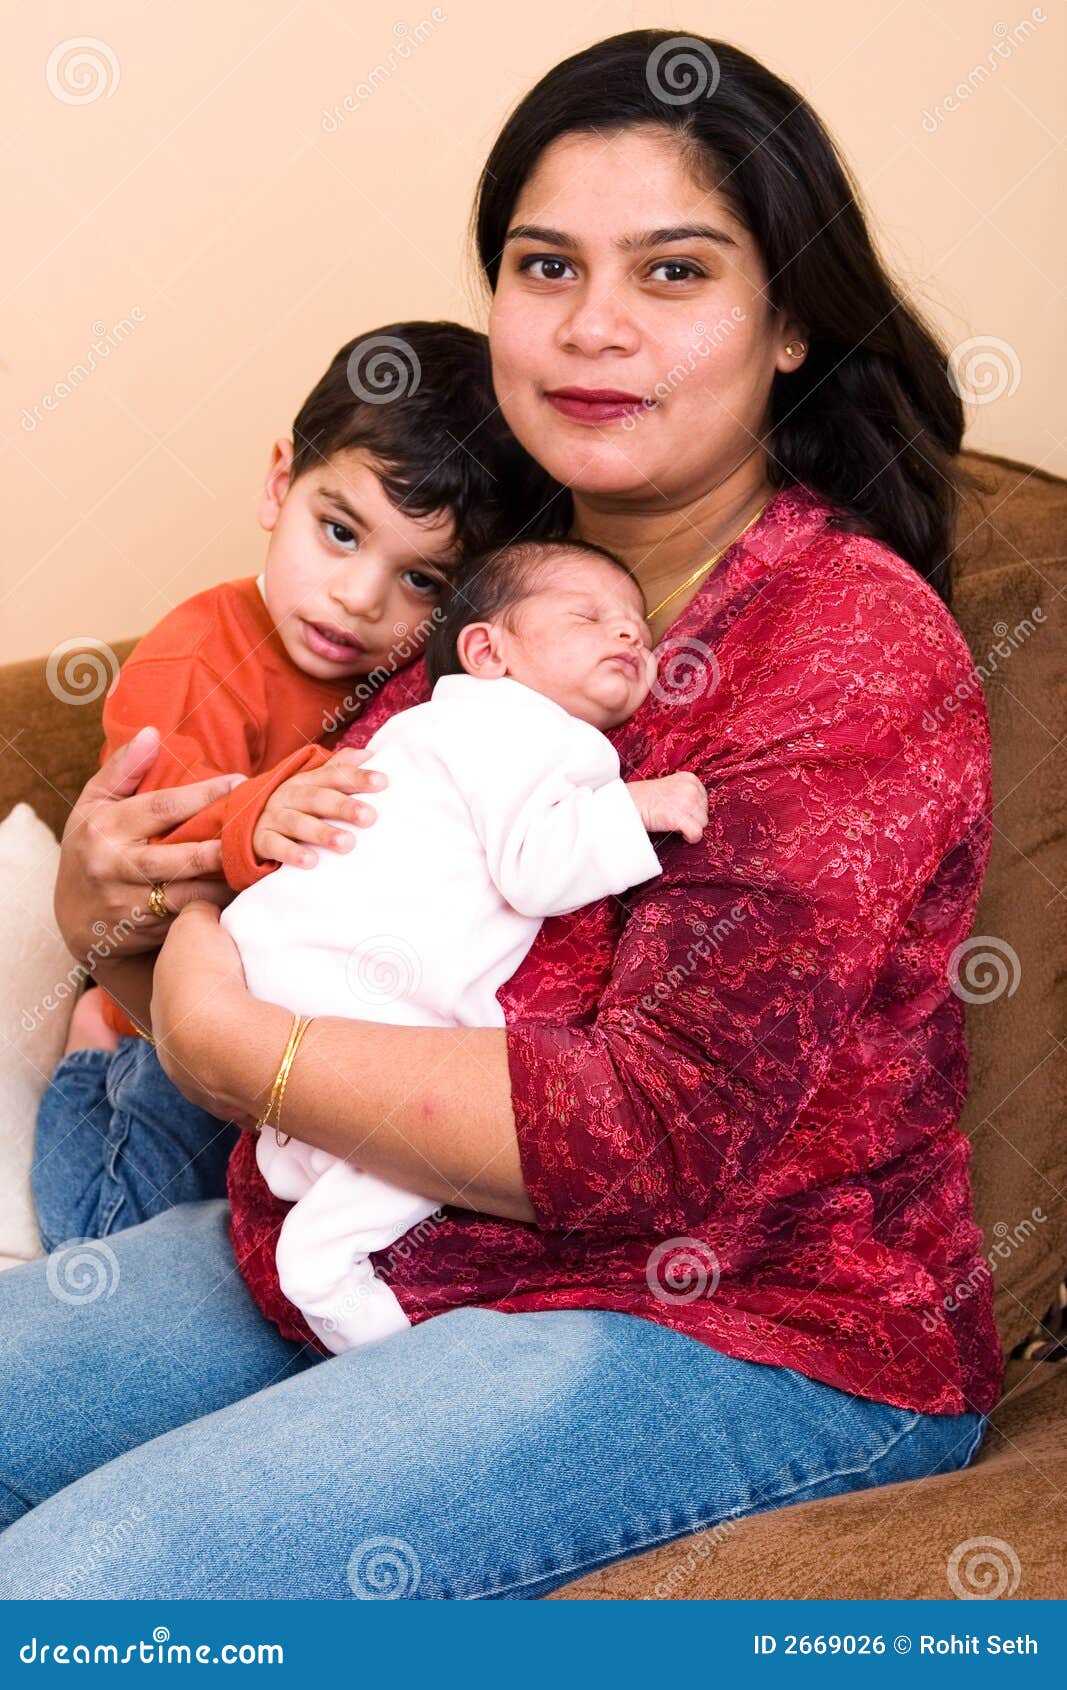 1,012 Mother Daughter Hair Indian Images, Stock Photos, 3D objects, &  Vectors | Shutterstock